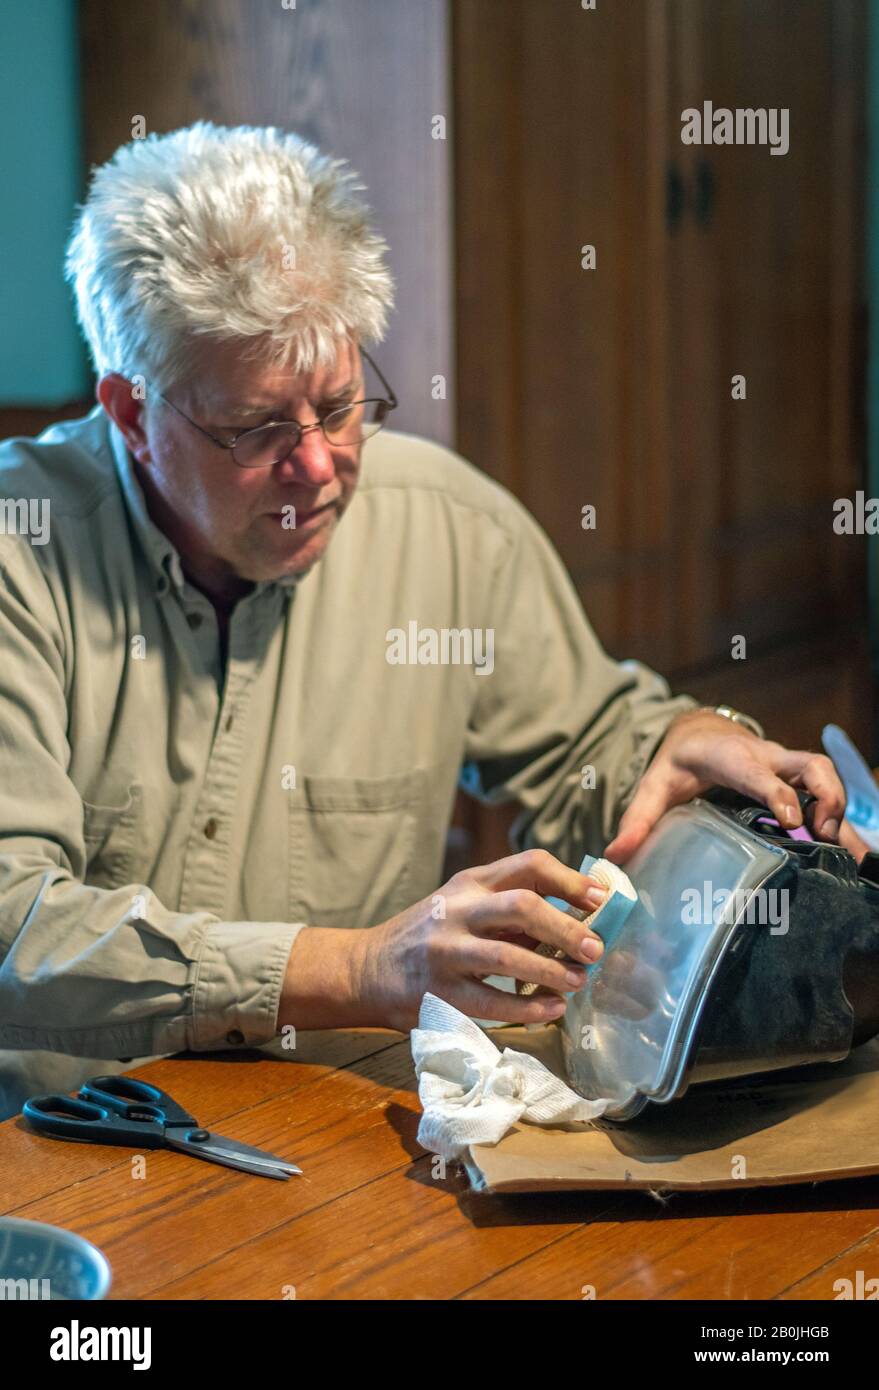 A handy man fixes a dim headlight, by sanding down the scratched up lens on the light Stock Photo